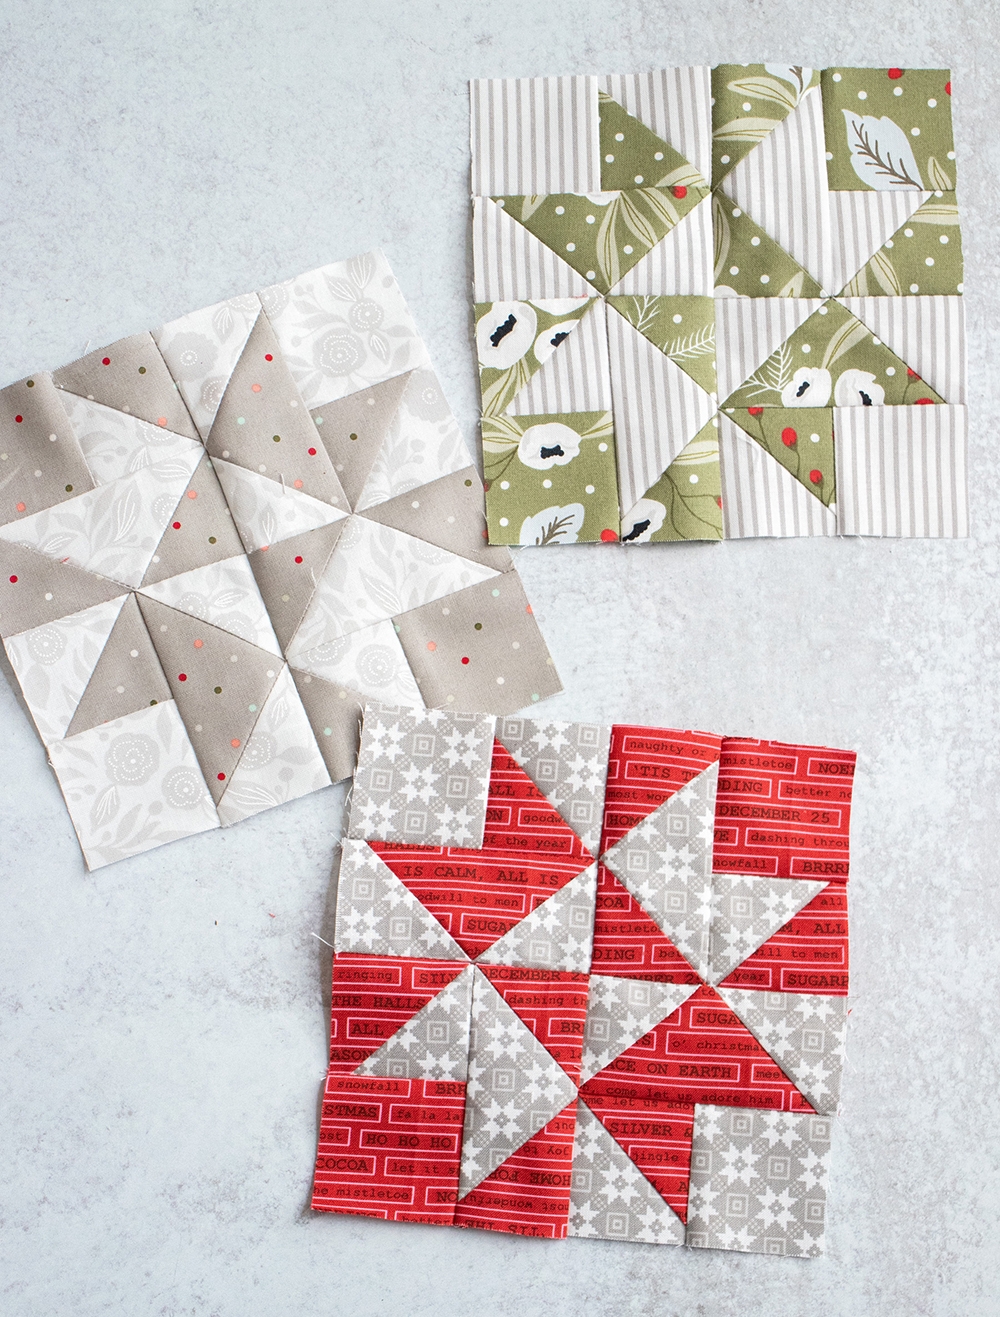 Sewcialites Block 22 is Blessed by Lella Boutique. Fabric is Christmas Morning by Lella Boutique for Moda Fabrics.